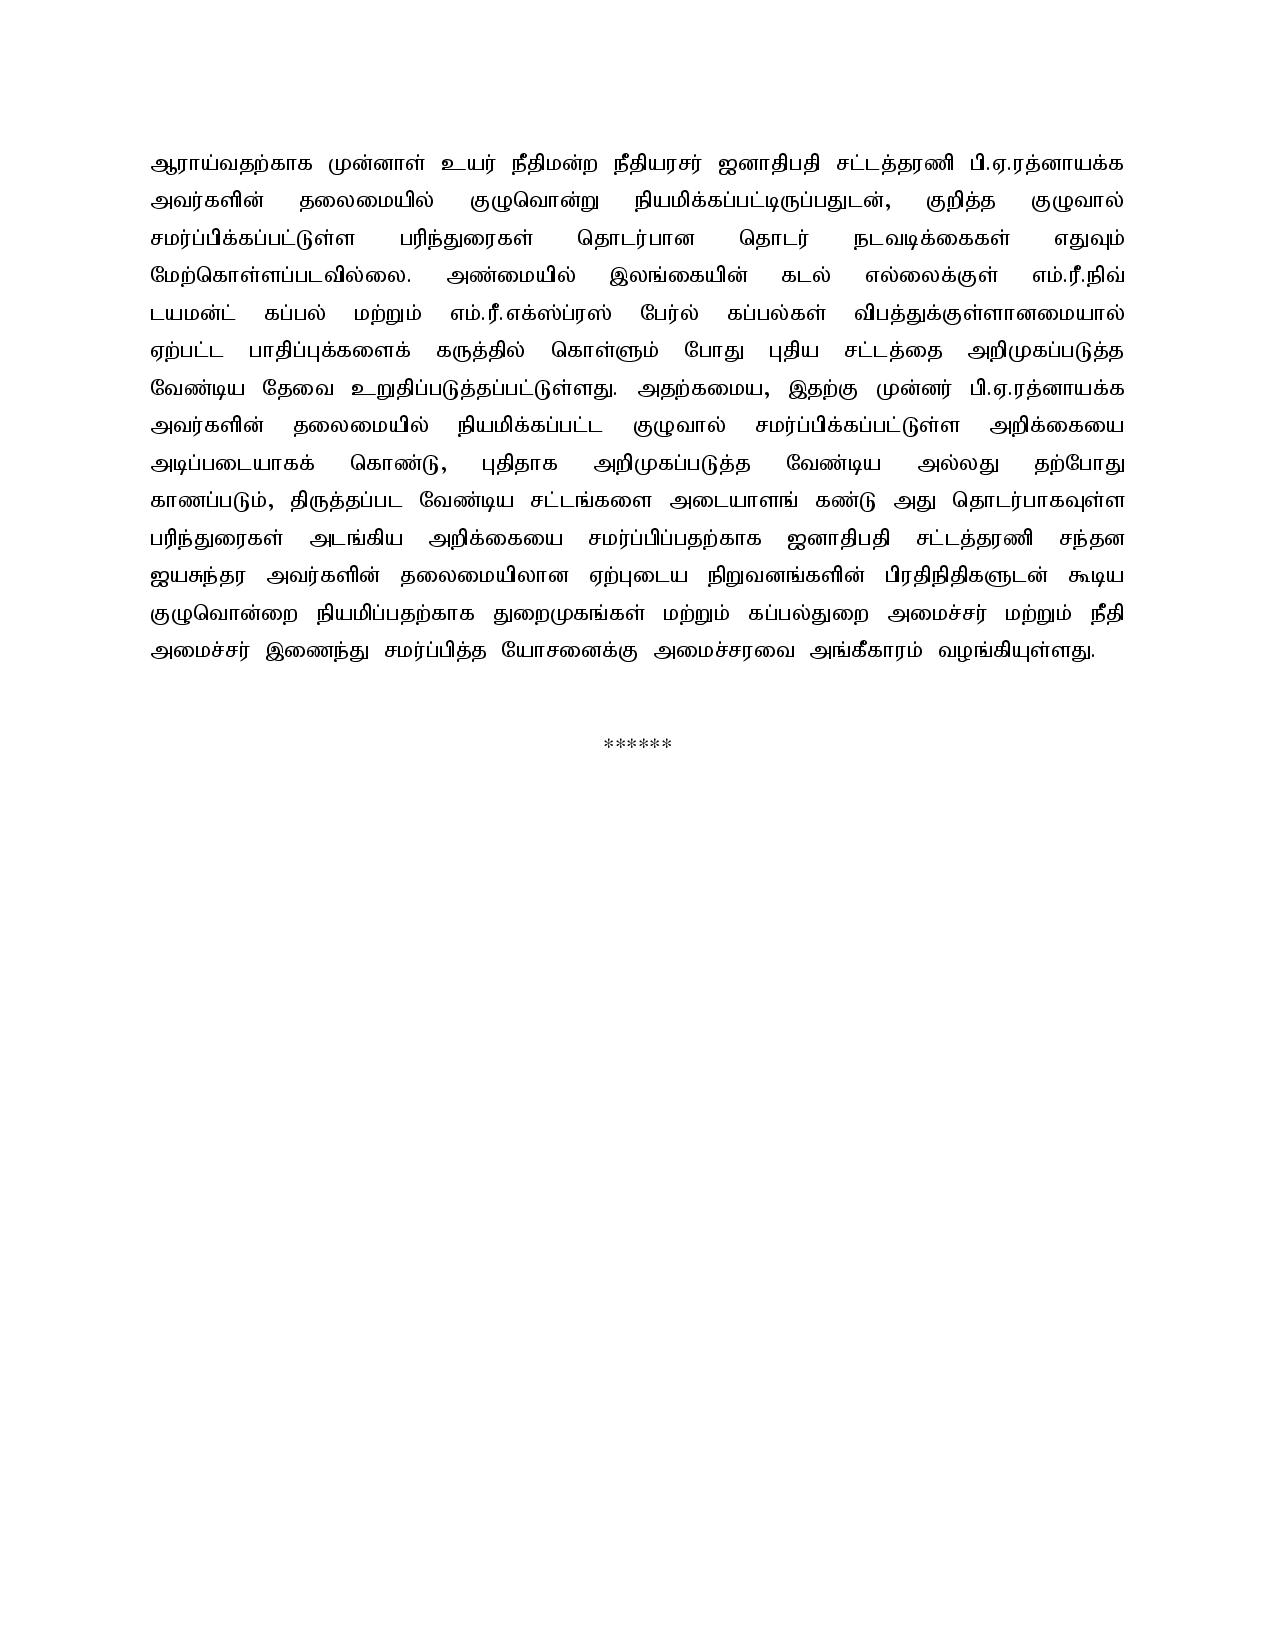 Cabinet Decision on 15.11.2021 Tamil page 005